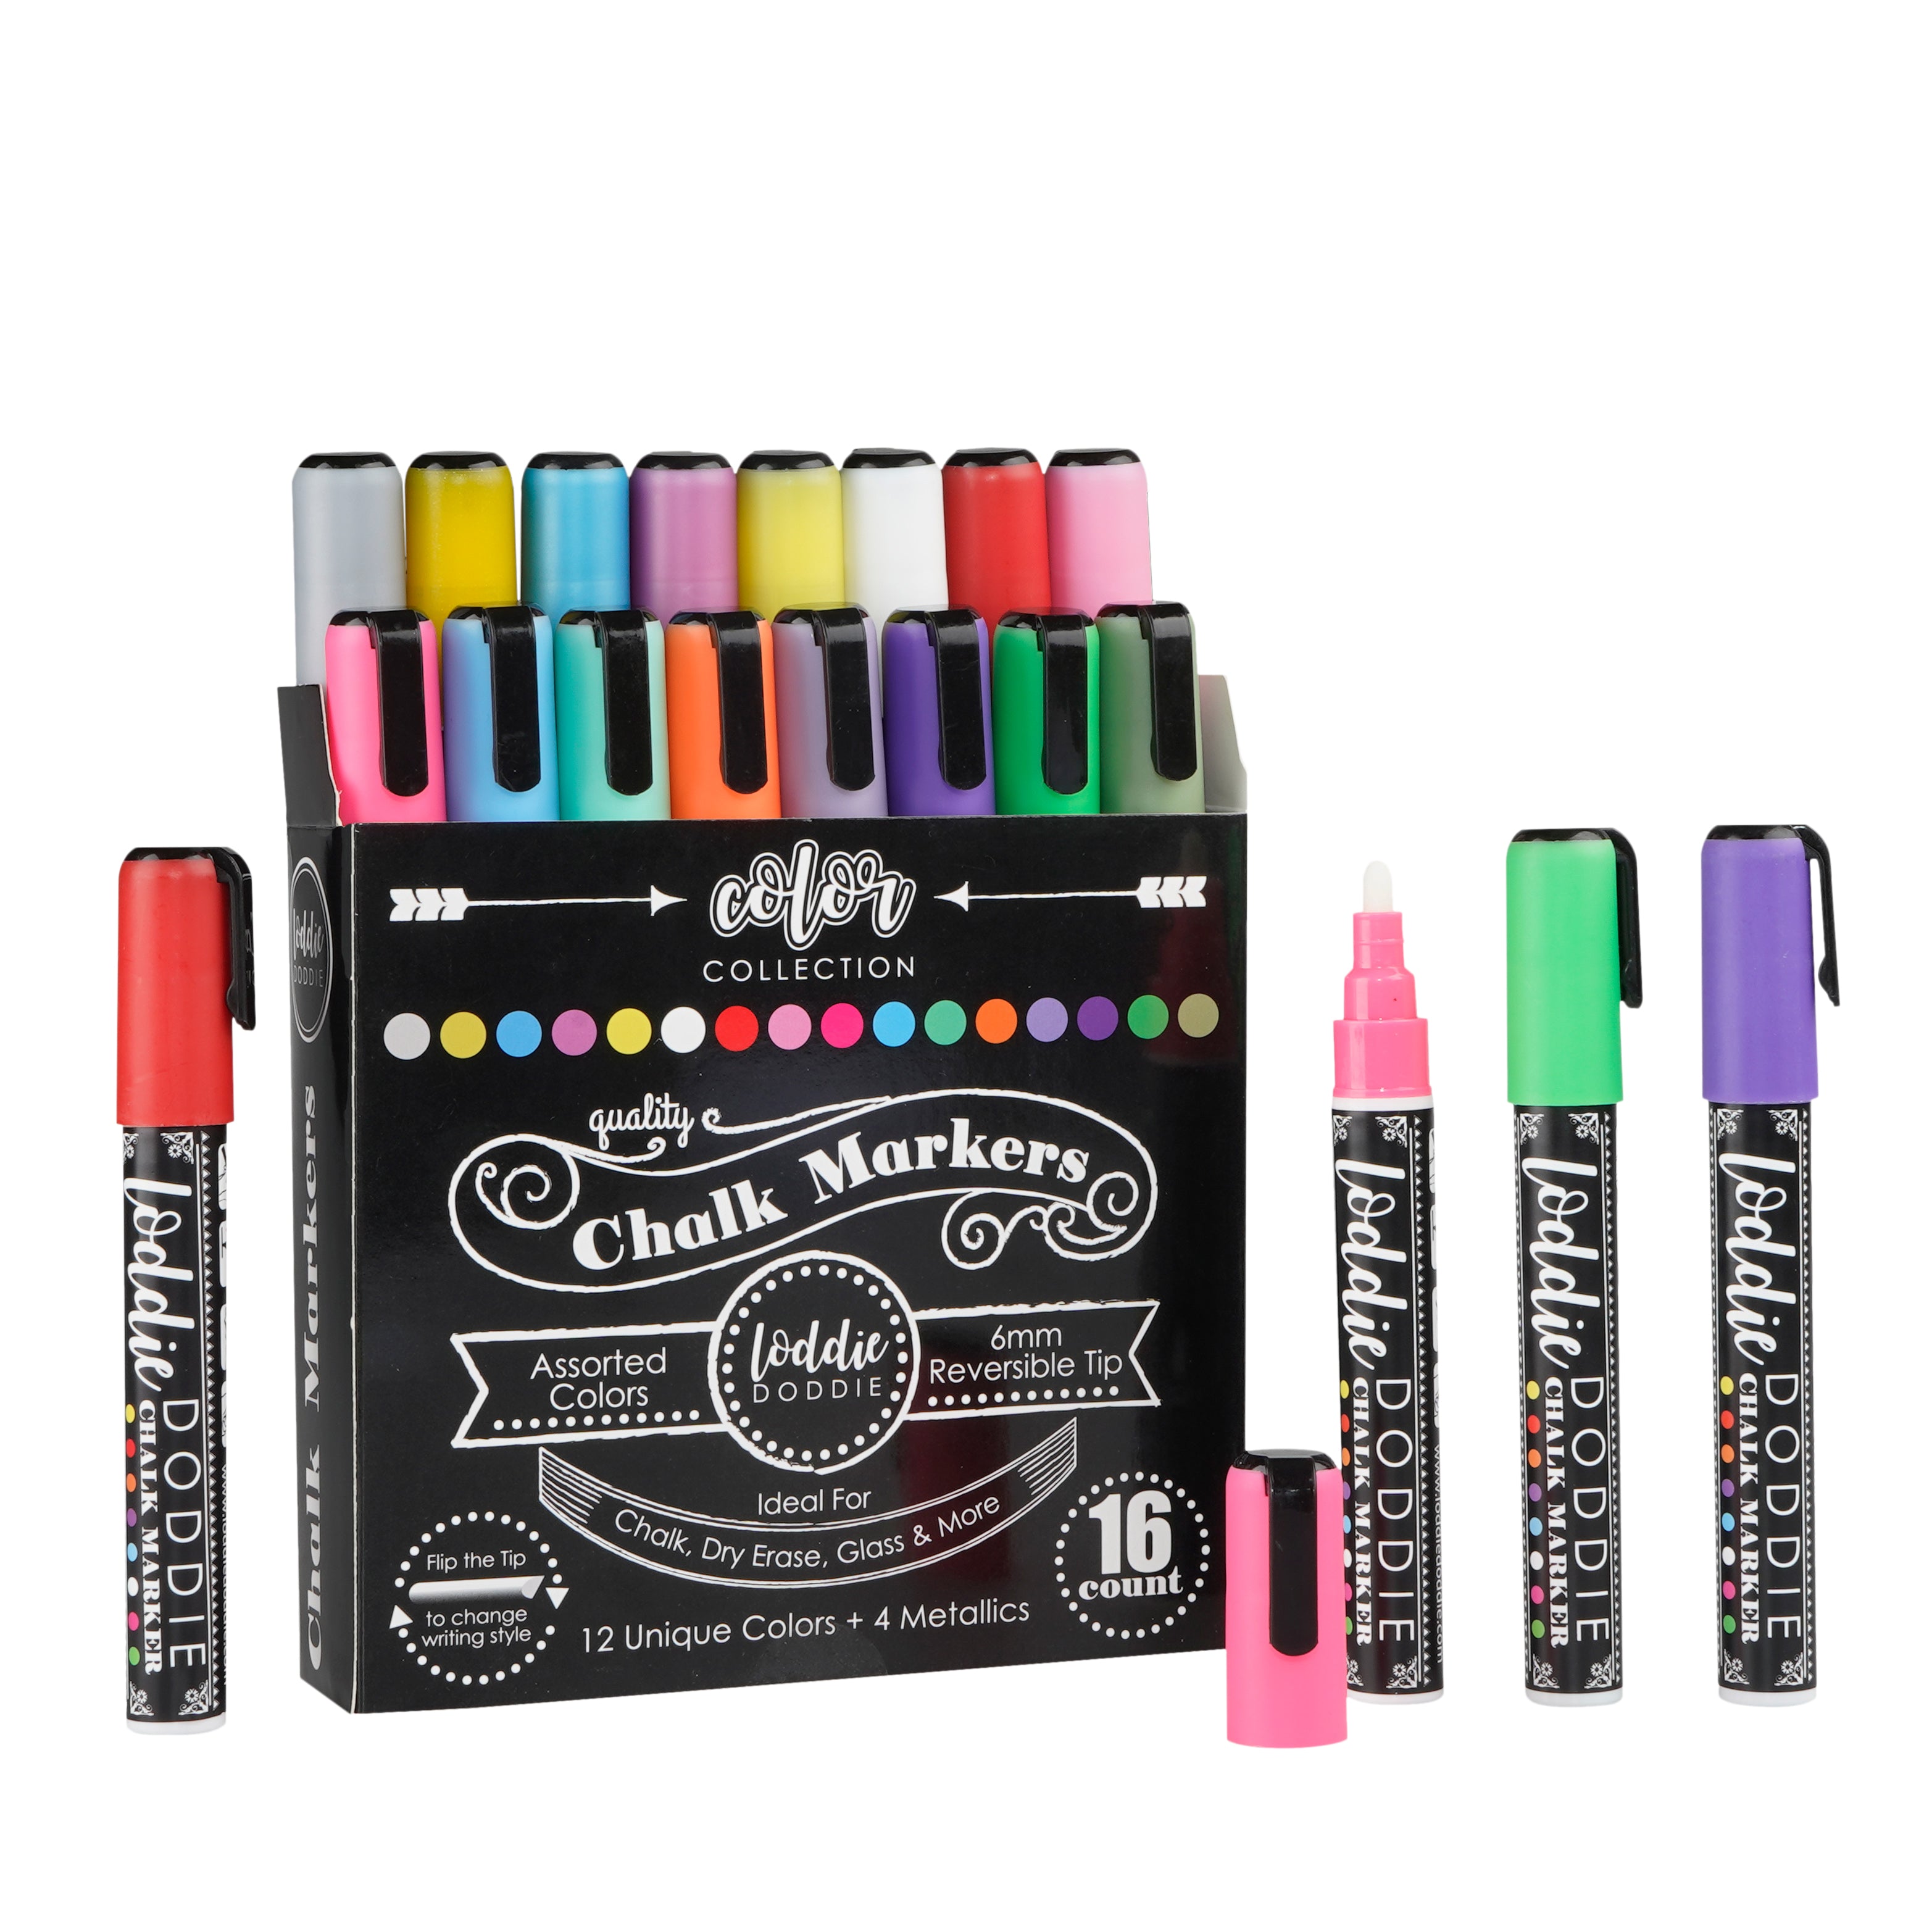 10 Count Rainbow Chalk Markers Limited Edition Lettering by Karen Colors by  Loddie Doddie 